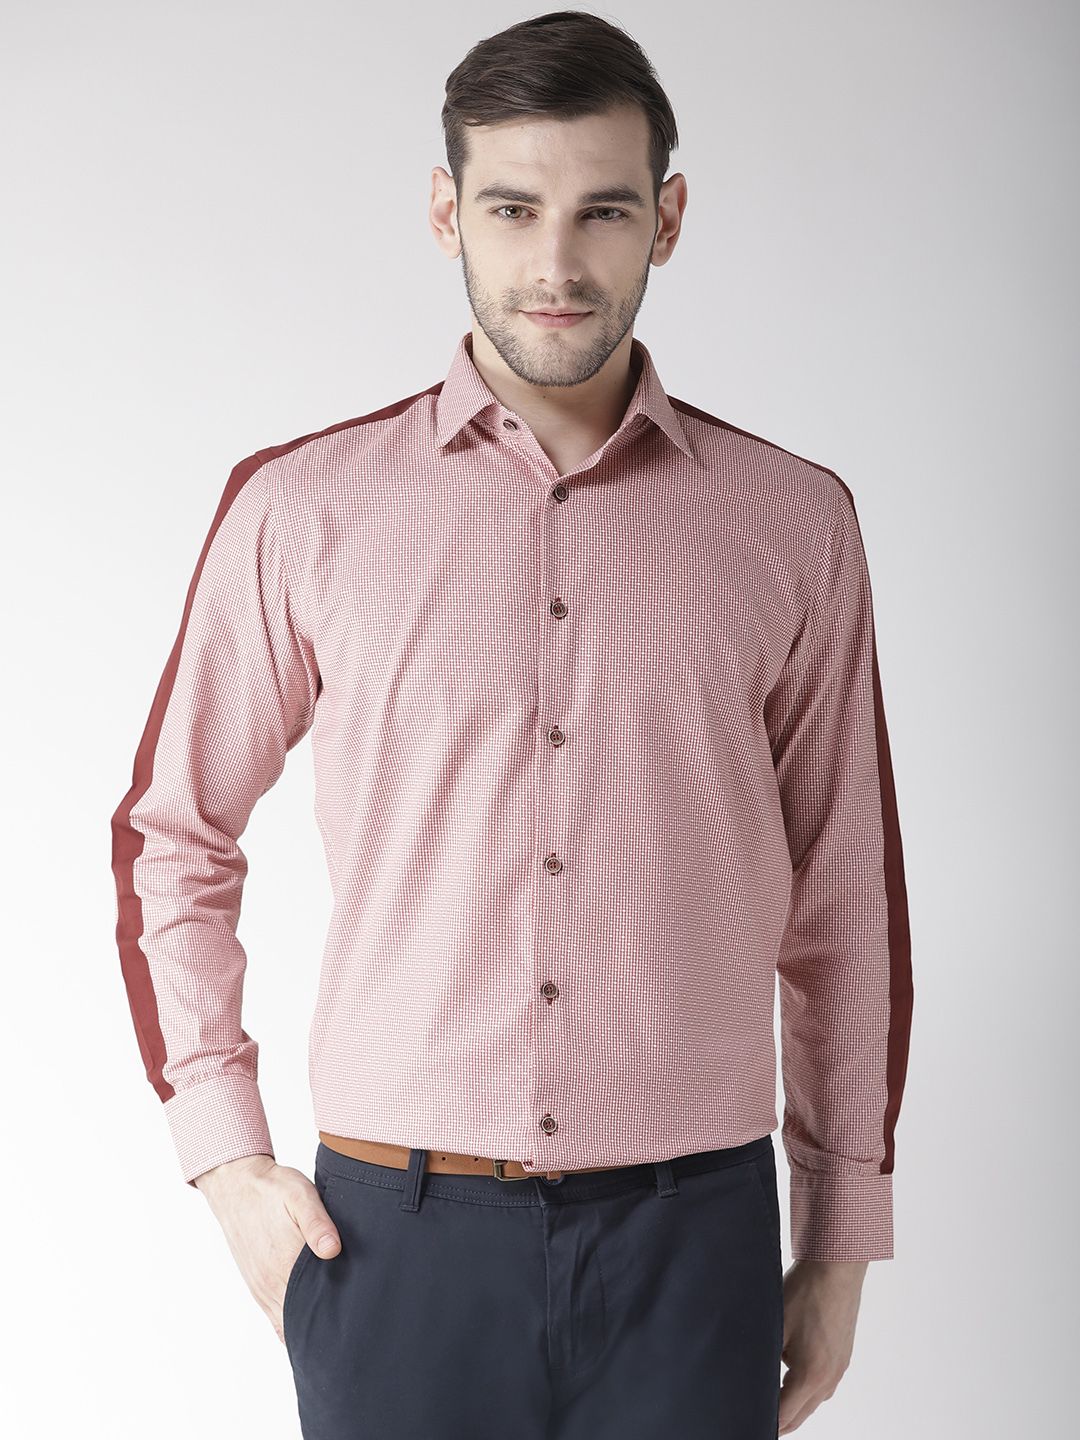 Richlook 100 Percent Cotton Red Solids Formal Shirt - Buy Richlook 100 ...